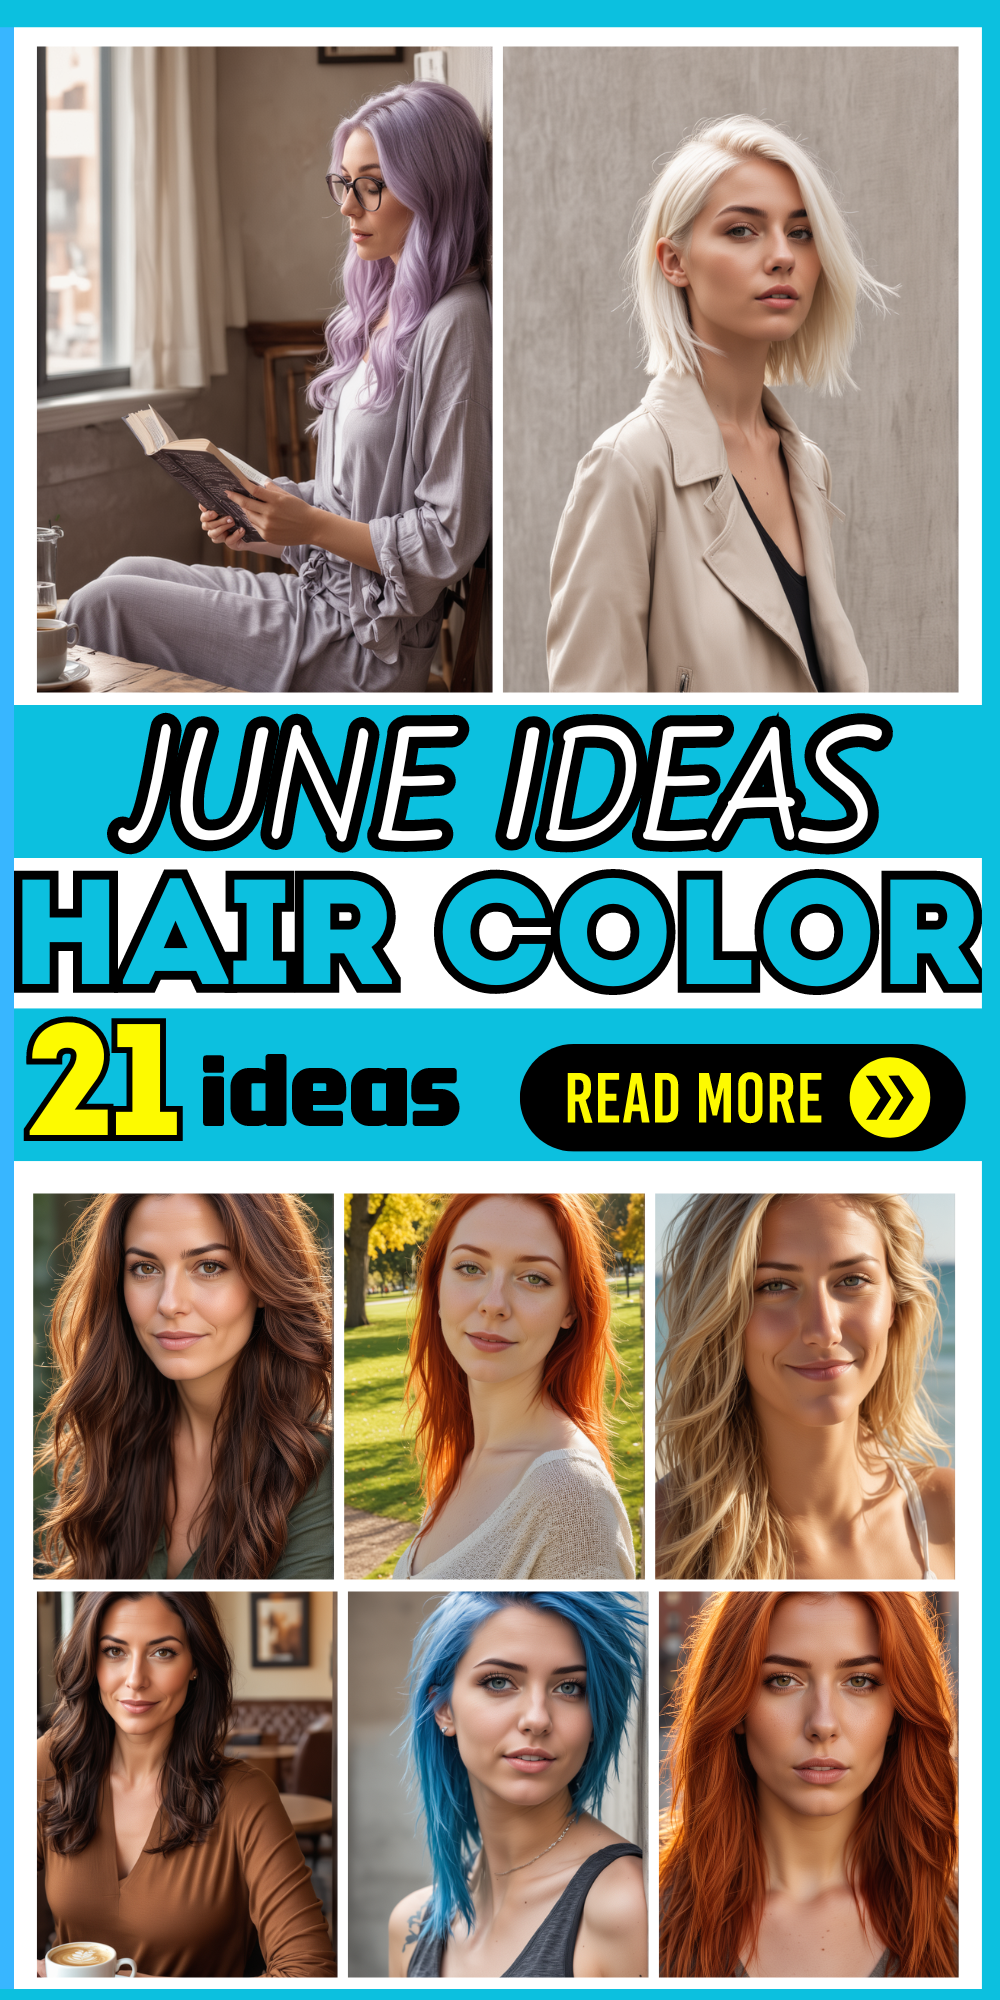 21 Bold June Hair Colors: Transform with Electric Purple & Silver Gray